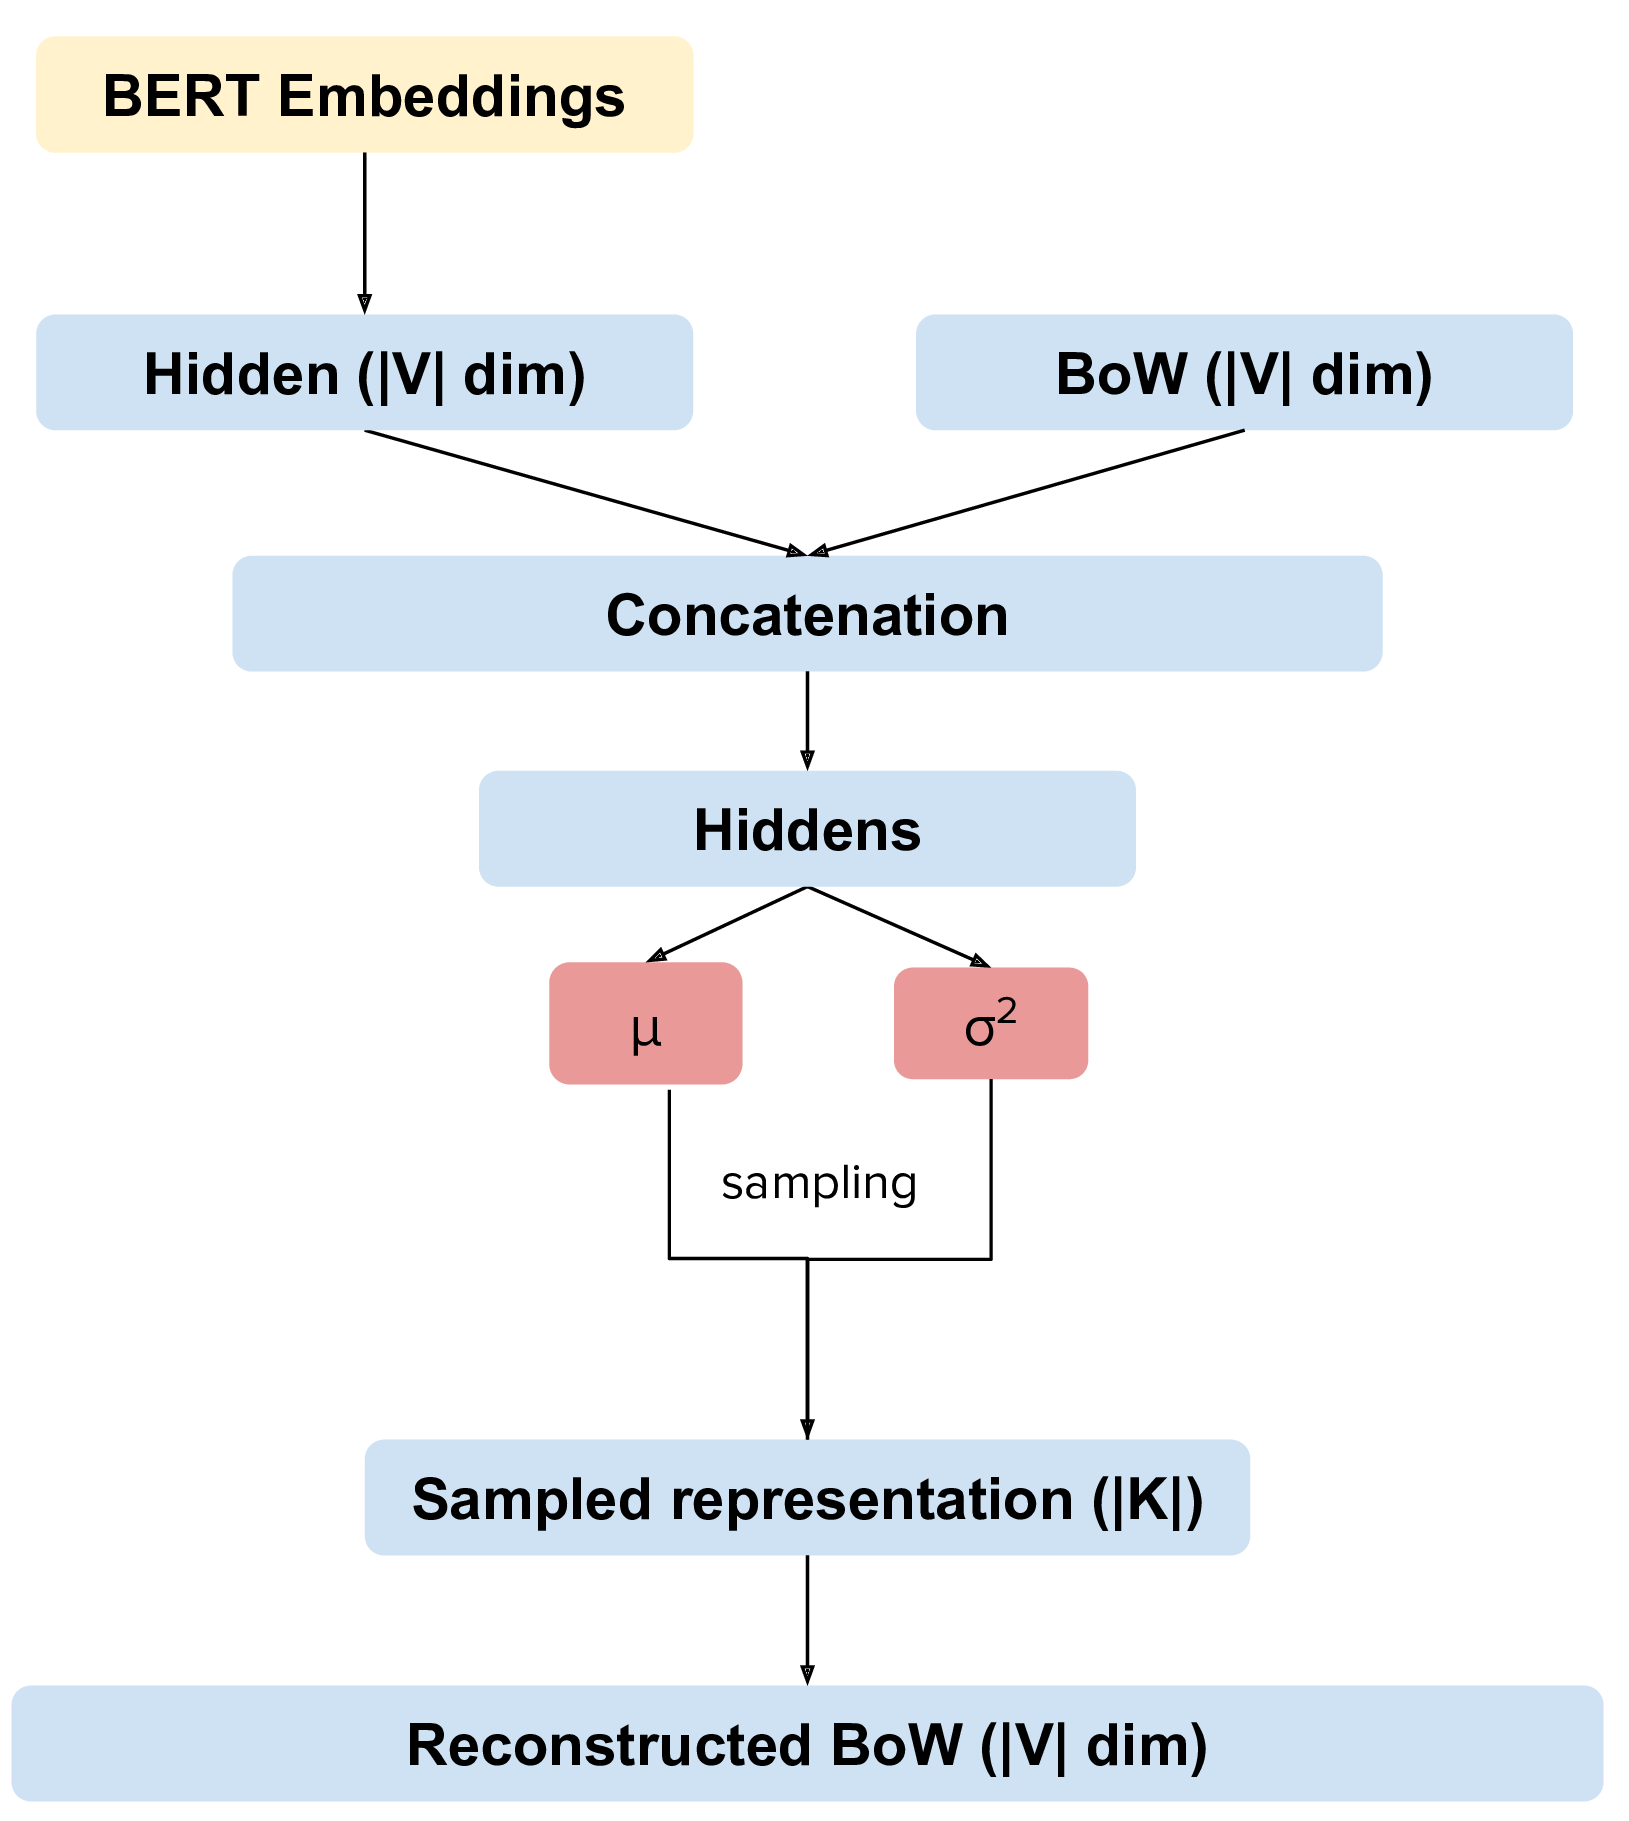 https://raw.githubusercontent.com/MilaNLProc/contextualized-topic-models/master/img/lm_topic_model.png